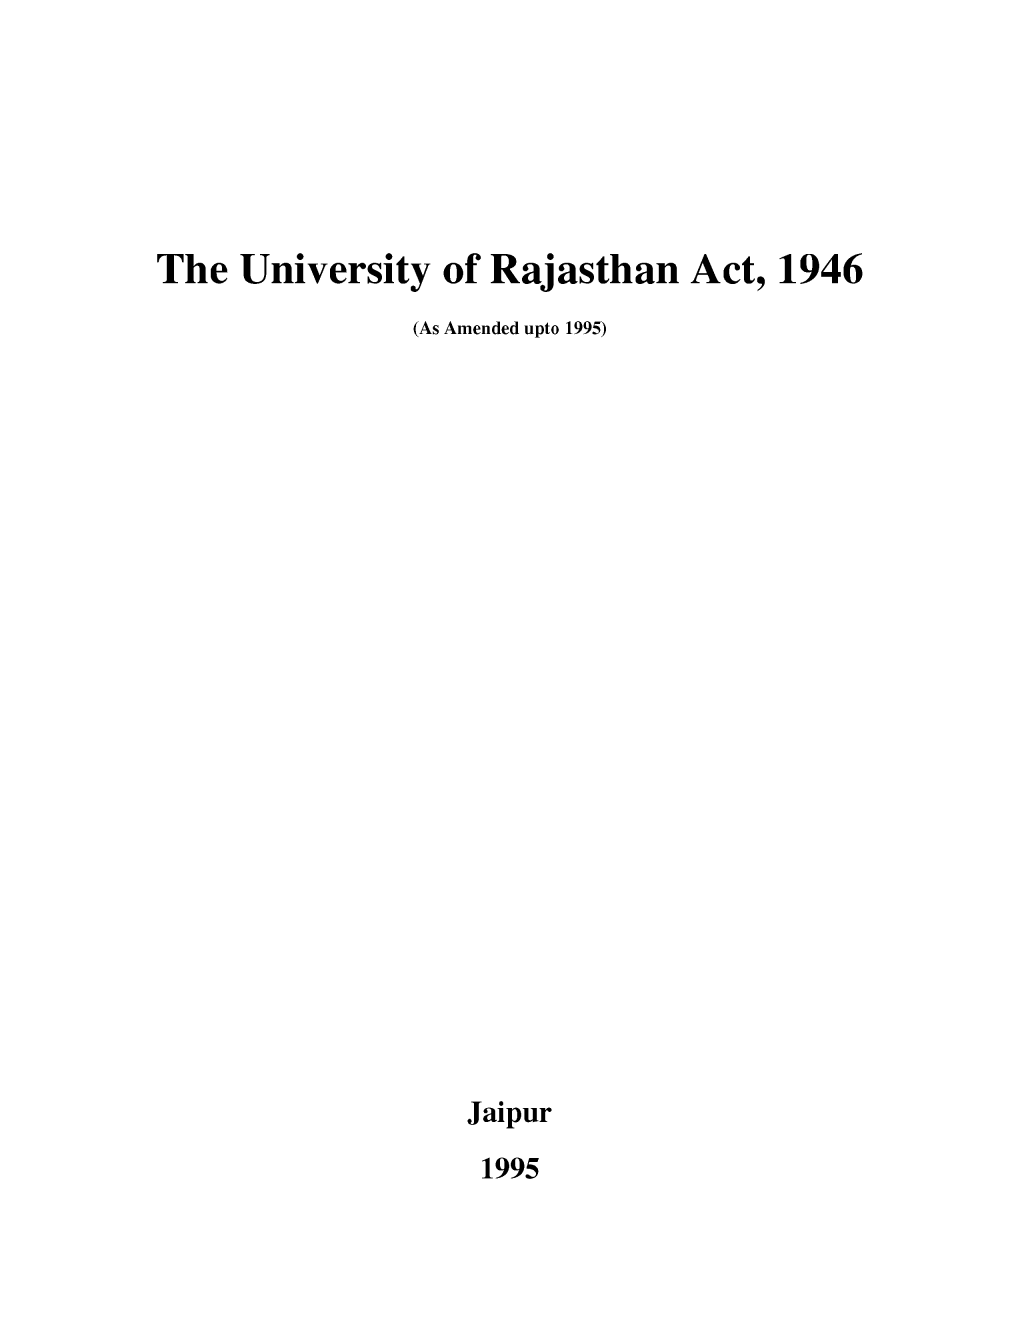 The University of Rajasthan Act, 1946